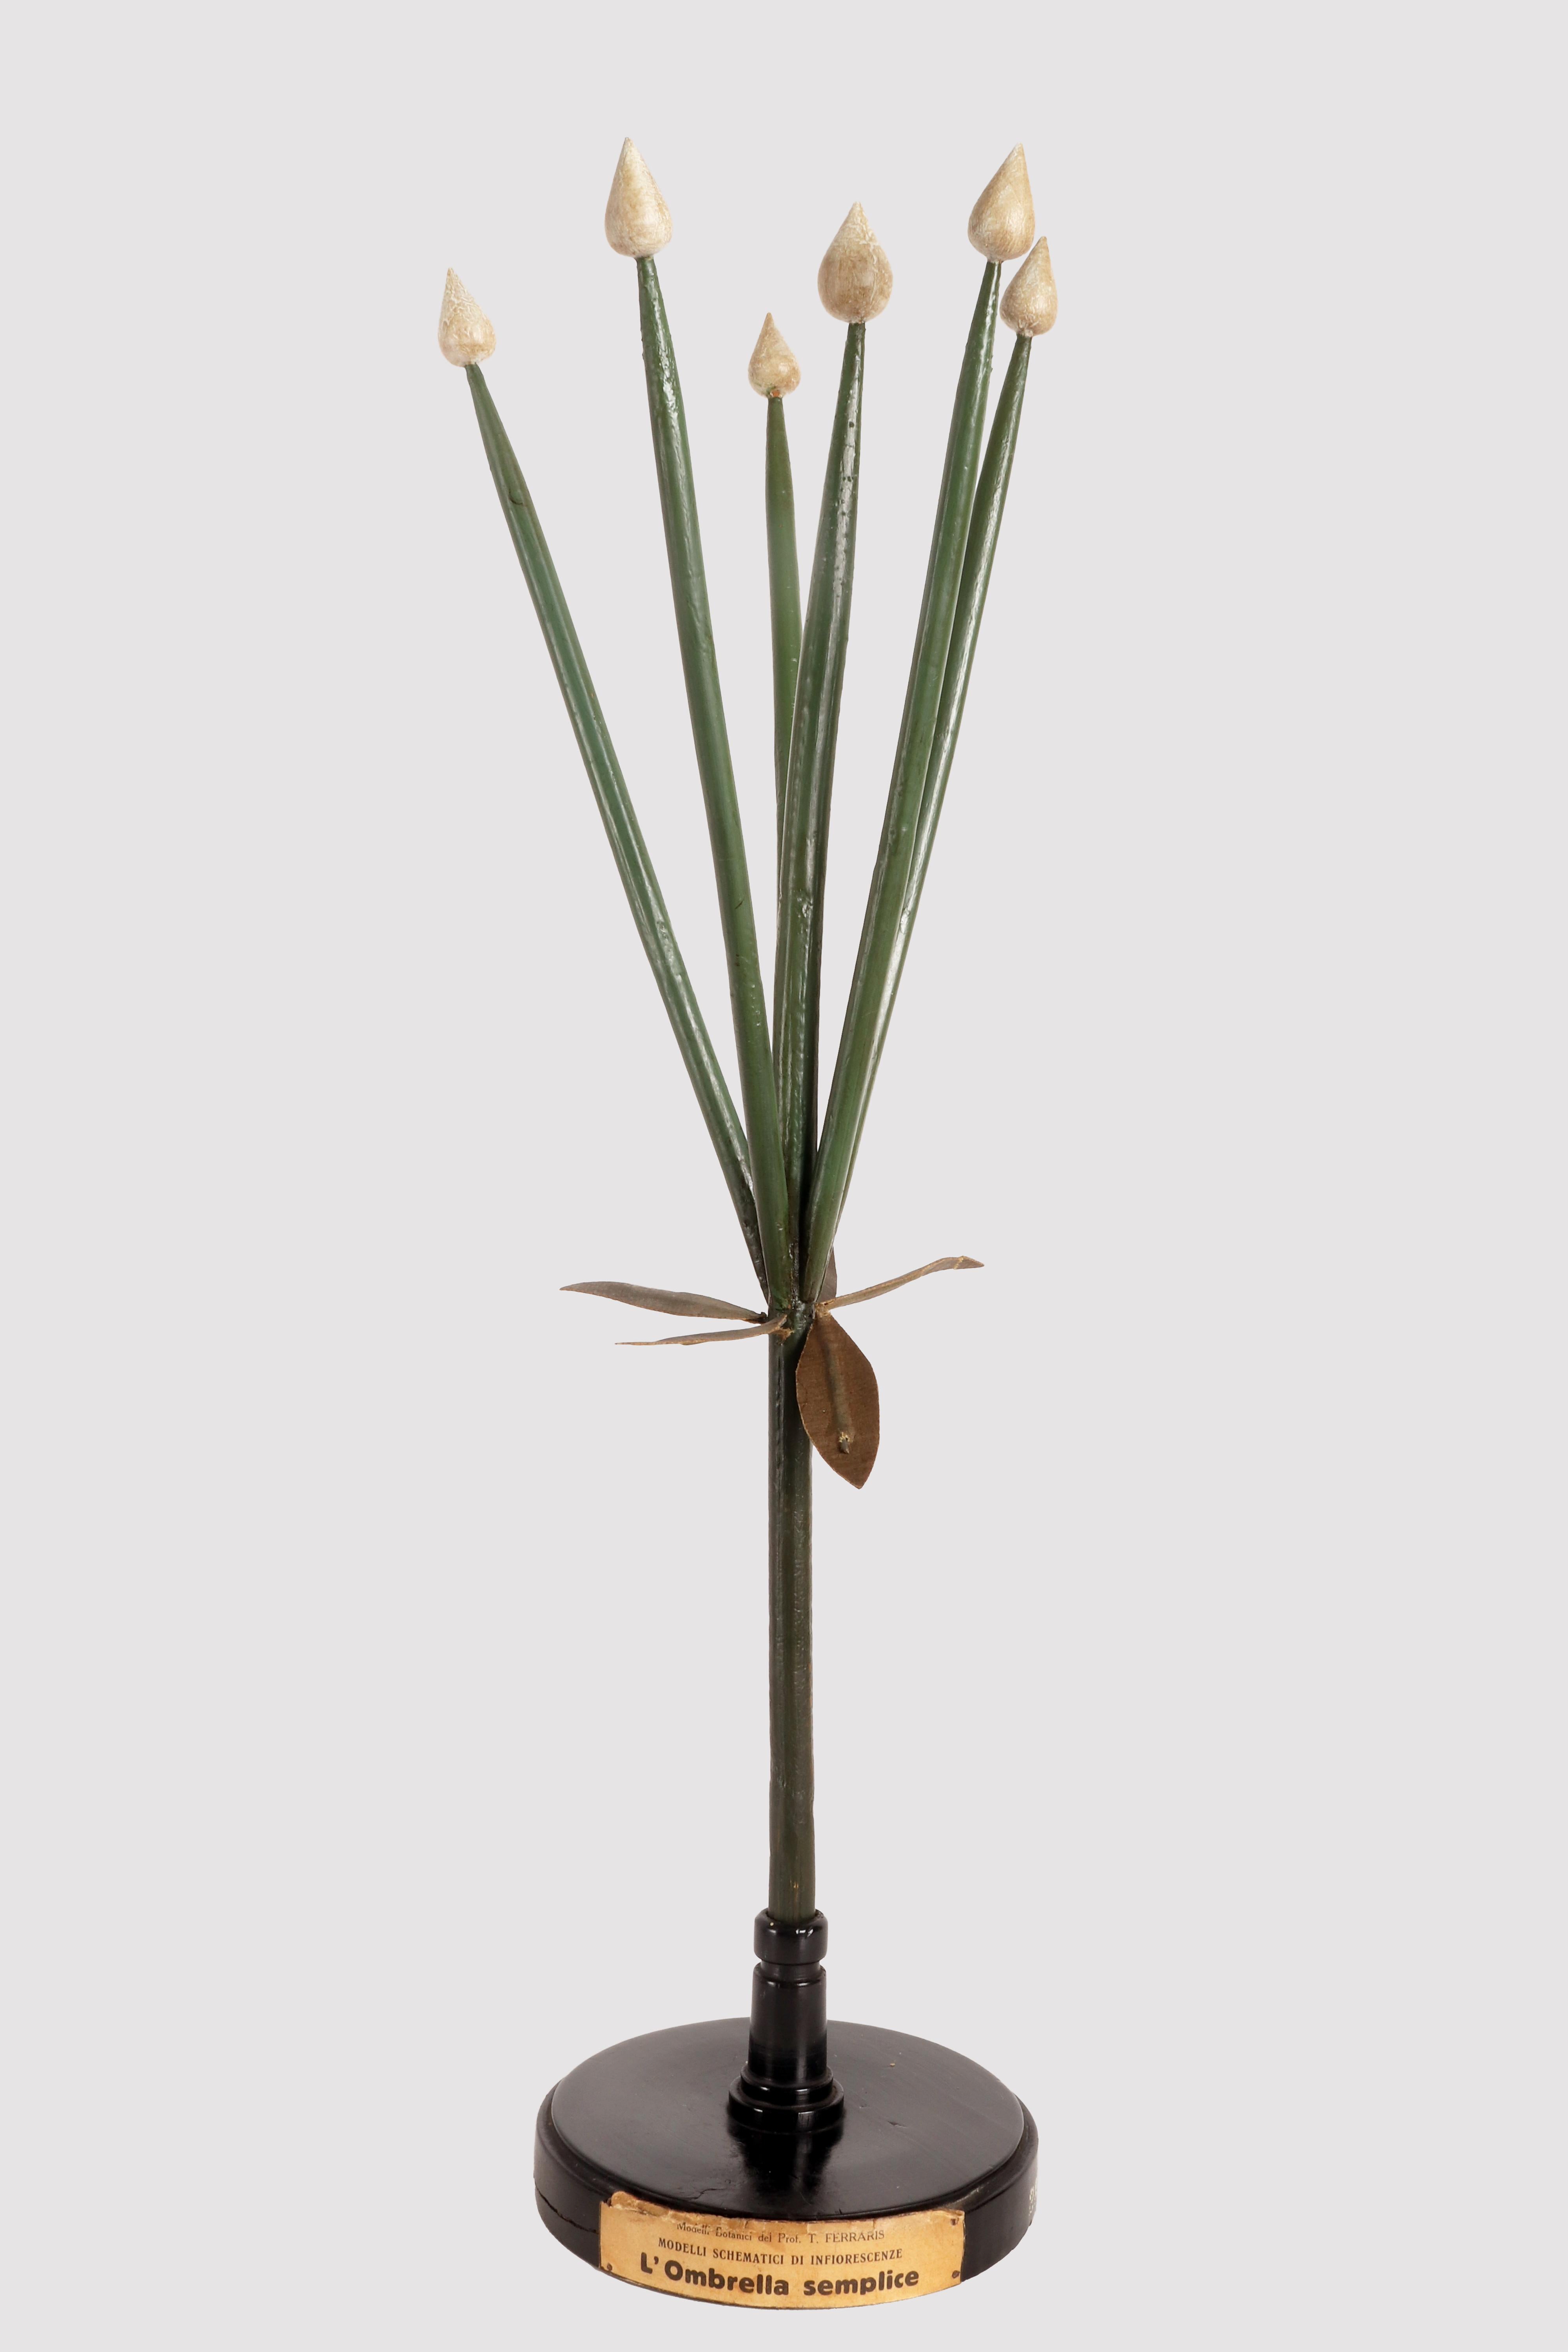 A rare botanical schematic model by Prof. T. Ferraris, didactic use, of a type of inflorescence specimen, the Simple Umbrella, made with hand-painted plaster colored gems, wooden branches and painted papier-mâché components. Mounted on a round black